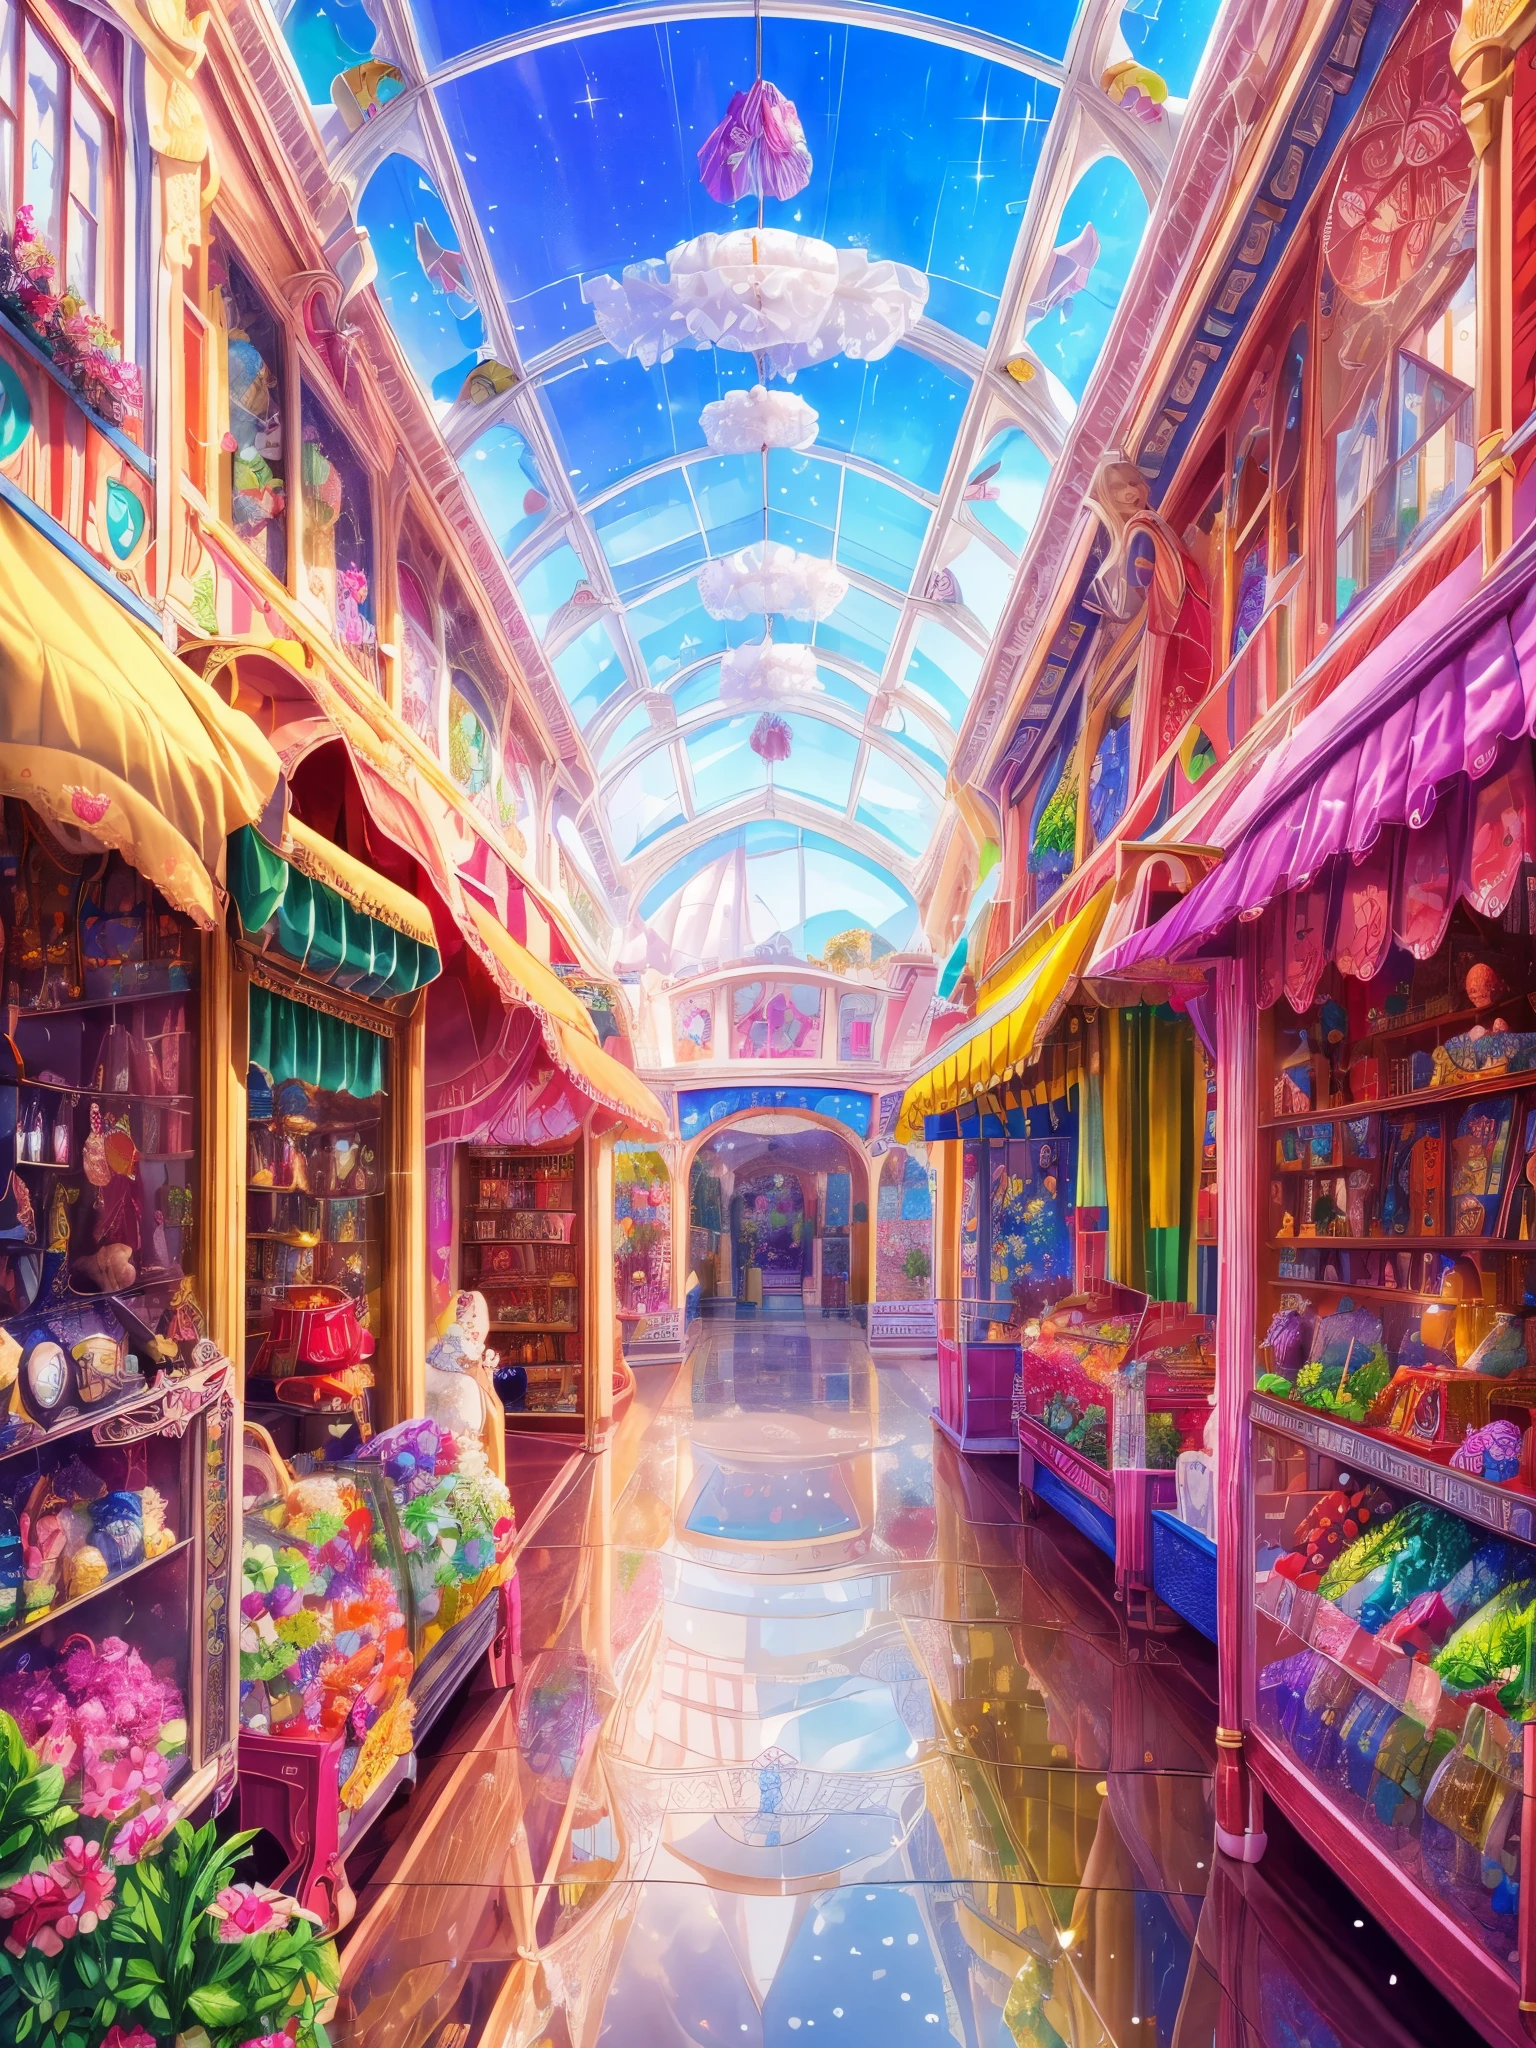 (Best Quality, 4k, 8k, High Resolution, Masterpiece: 1.2), Super Detailed, (Realistic, Photorealistic, Photorealistic: 1.37), Portrait, Animation, Girl Peeking Through Toy Store Window, Curiosity Full facial expressions, sparkling eyes, adorable smiles, flowing locks, playful gestures, soft sunlight streaming through the windows, vibrant colors, scenes filled with toys, magical atmosphere, and meticulously rendered details. , vividly painted toys, perfect shading, exquisite attention to texture, intricate dollhouses and miniature carousels, cute stuffed animals, delicate porcelain figurines, realistic teddy bears, sparkling glass balls, shimmering metal robots, sparkles Model planes and cars, playful reflections in glass, reflections of a girl's charm and wonder, childhood innocence and joy, imagination and dreams come to life. A colorful expression of life, traditional yet modern, quirky and nostalgic, the joys of childhood. 6 to 10 years old